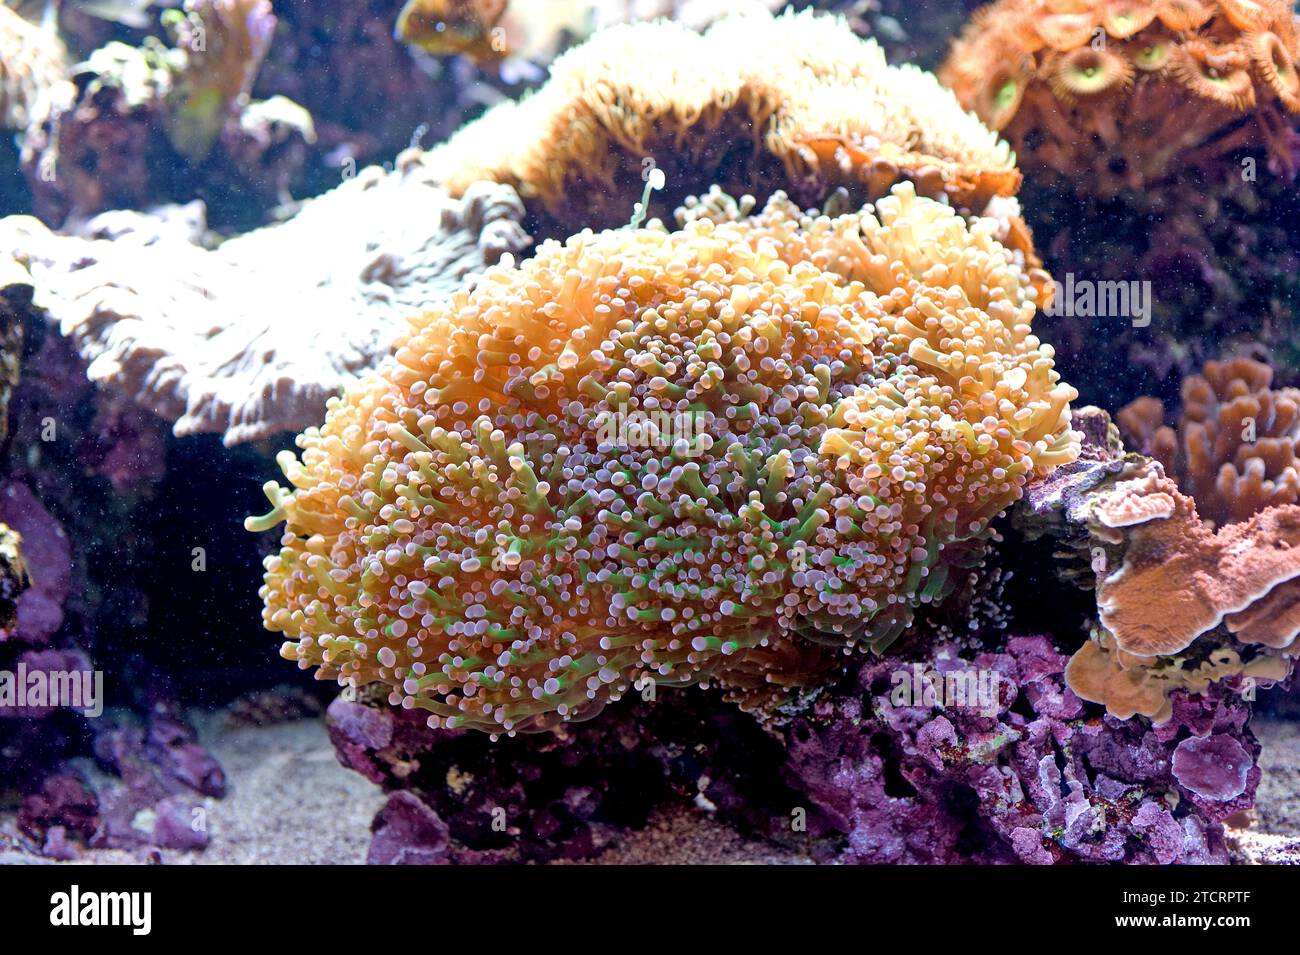 Torch coral (Euphyllia glabrescens) is a stony coral. Stock Photo